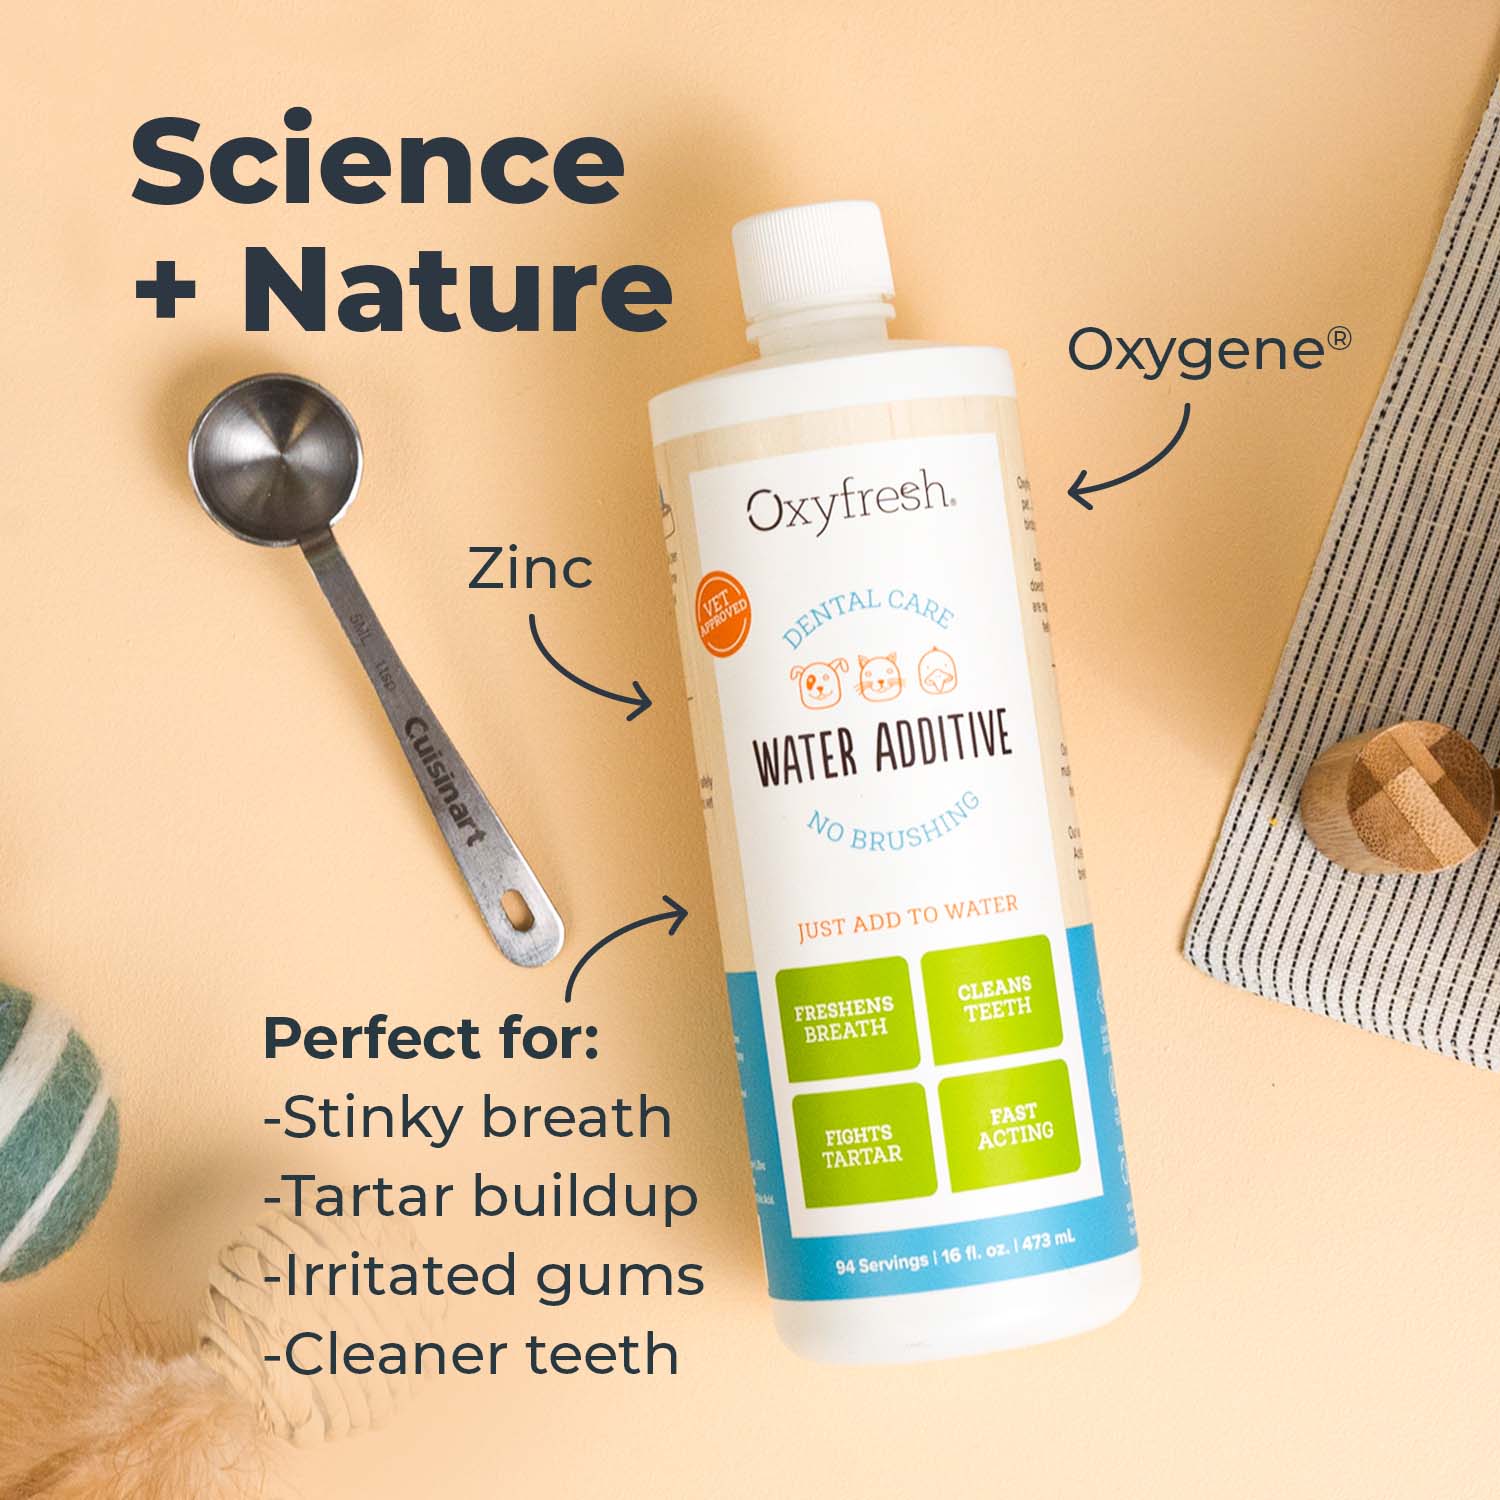 oxyfresh-pet-water-additive-perfect-for-stinky-breath-tartar-buildup-irritated-gums-and-cleaner-teeth